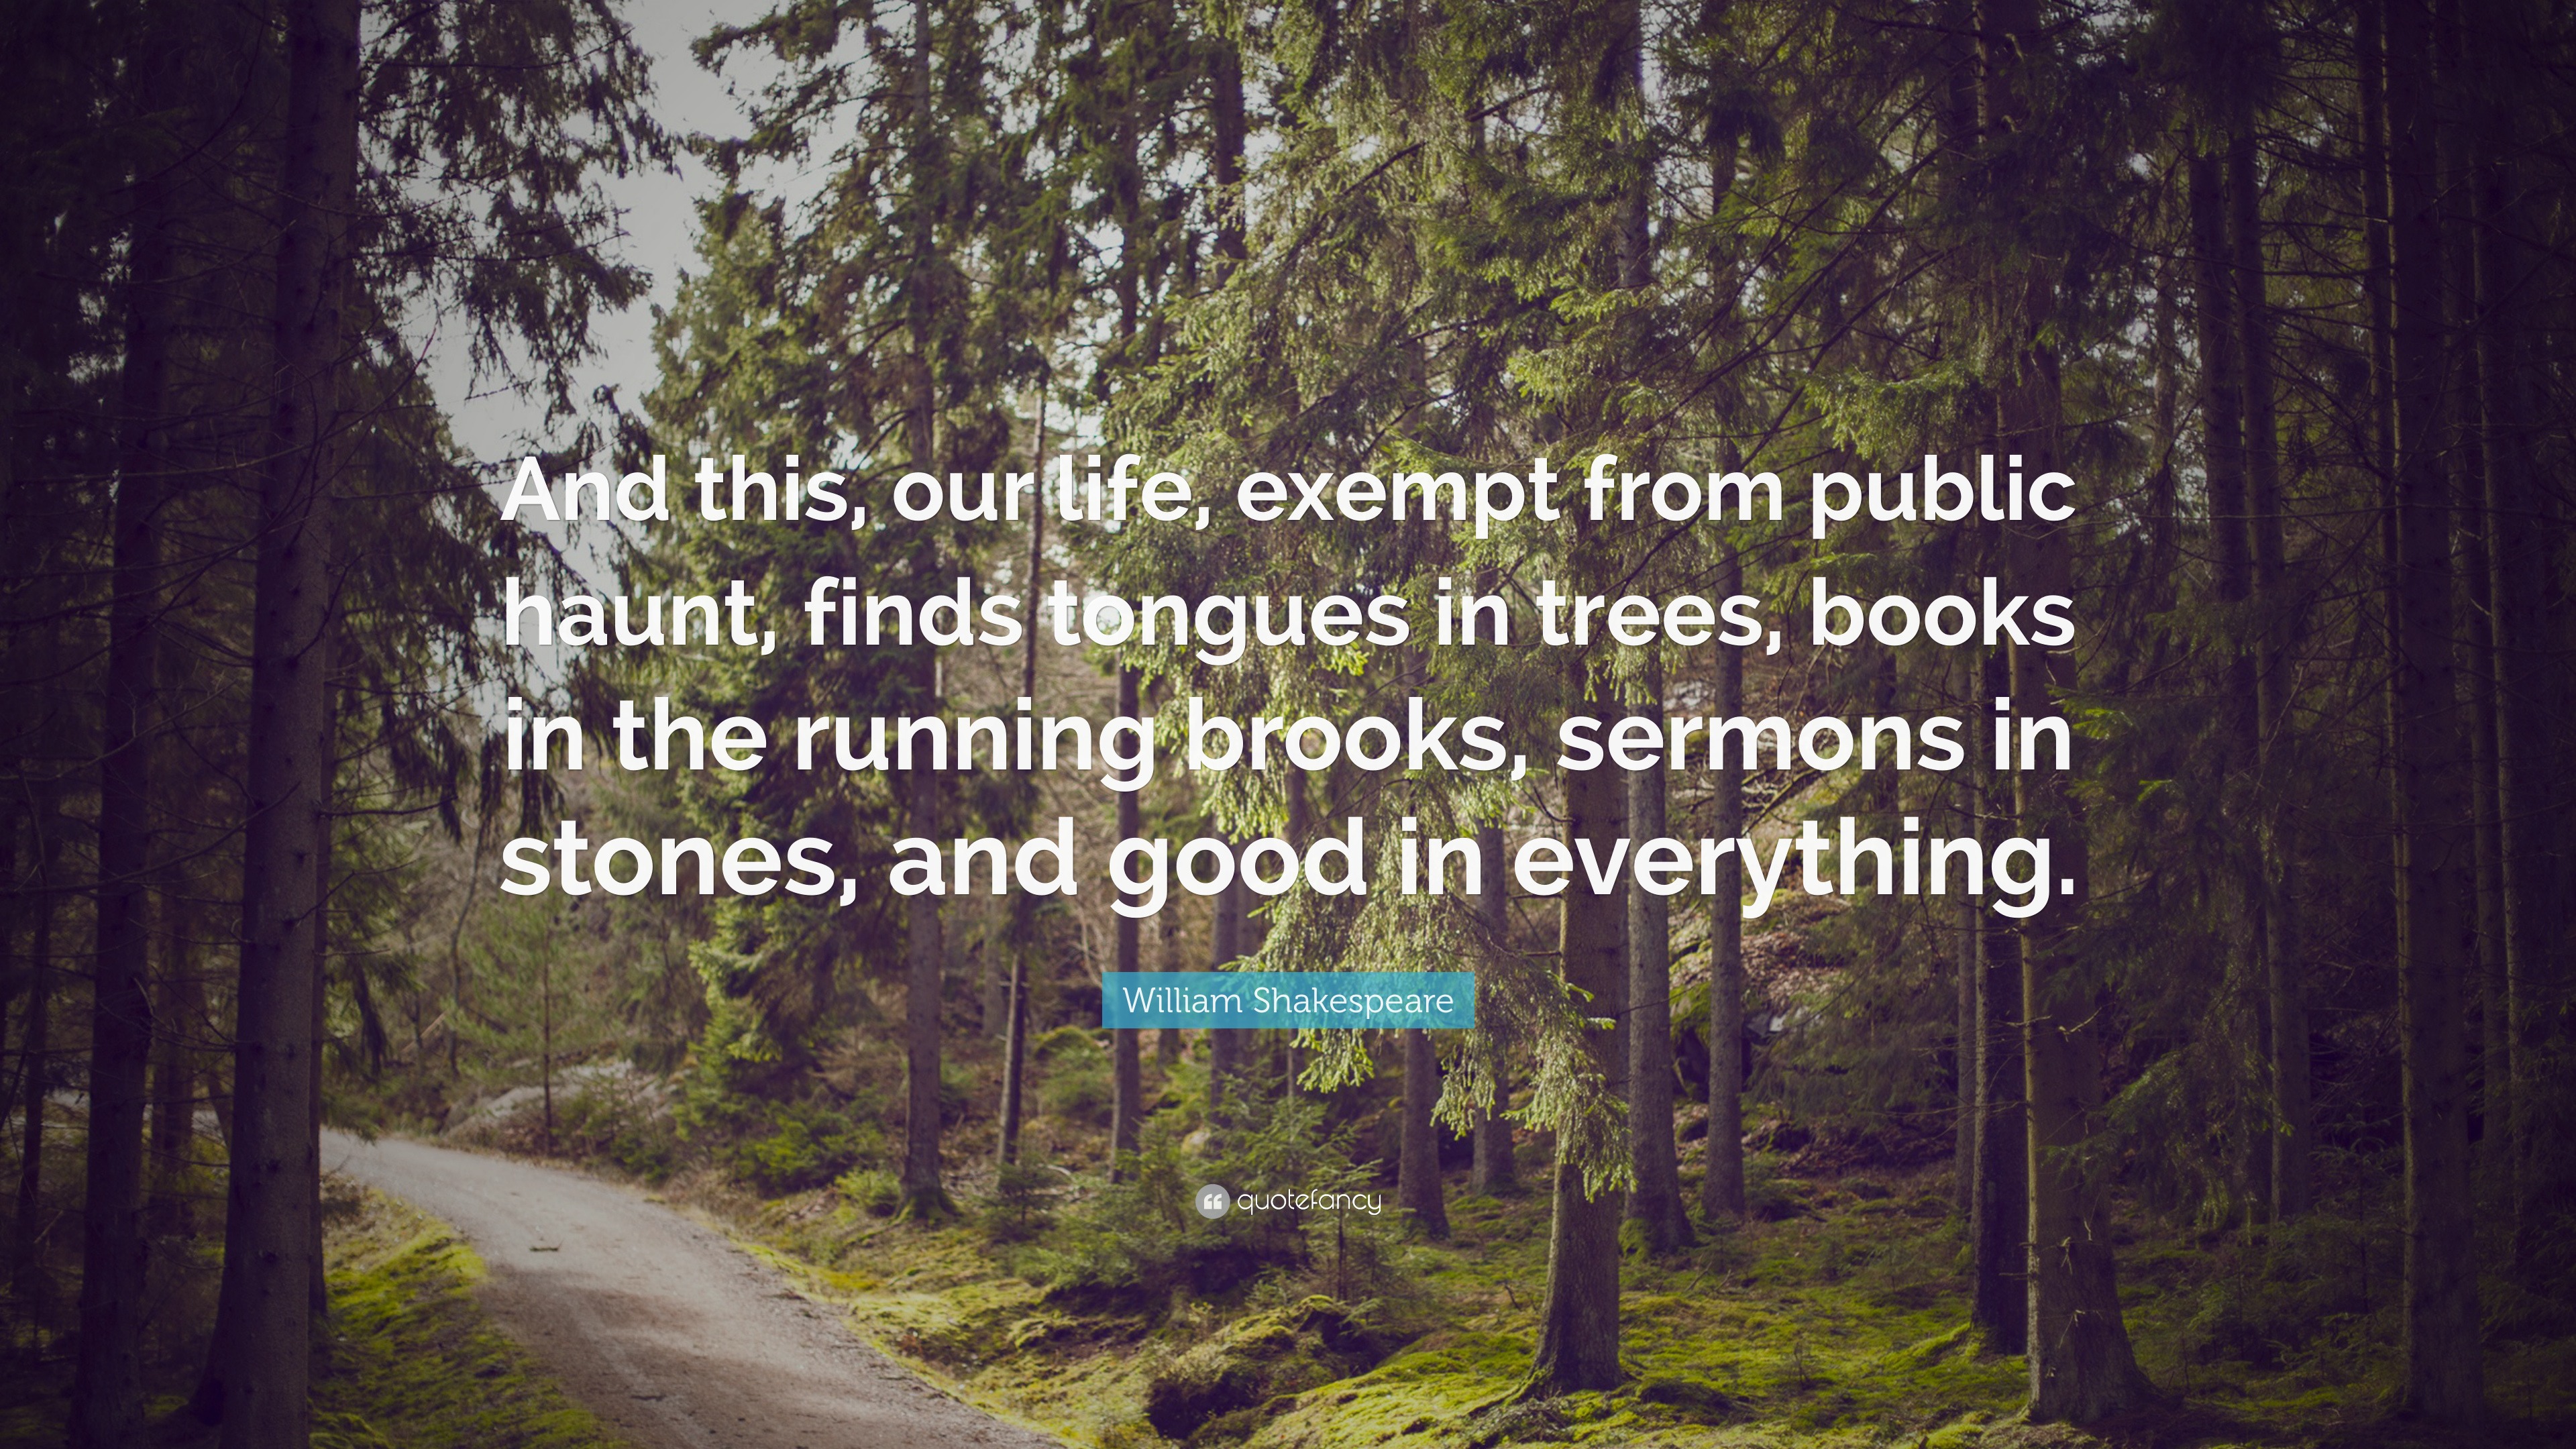 William Shakespeare Quote: “And this, our life, exempt from public